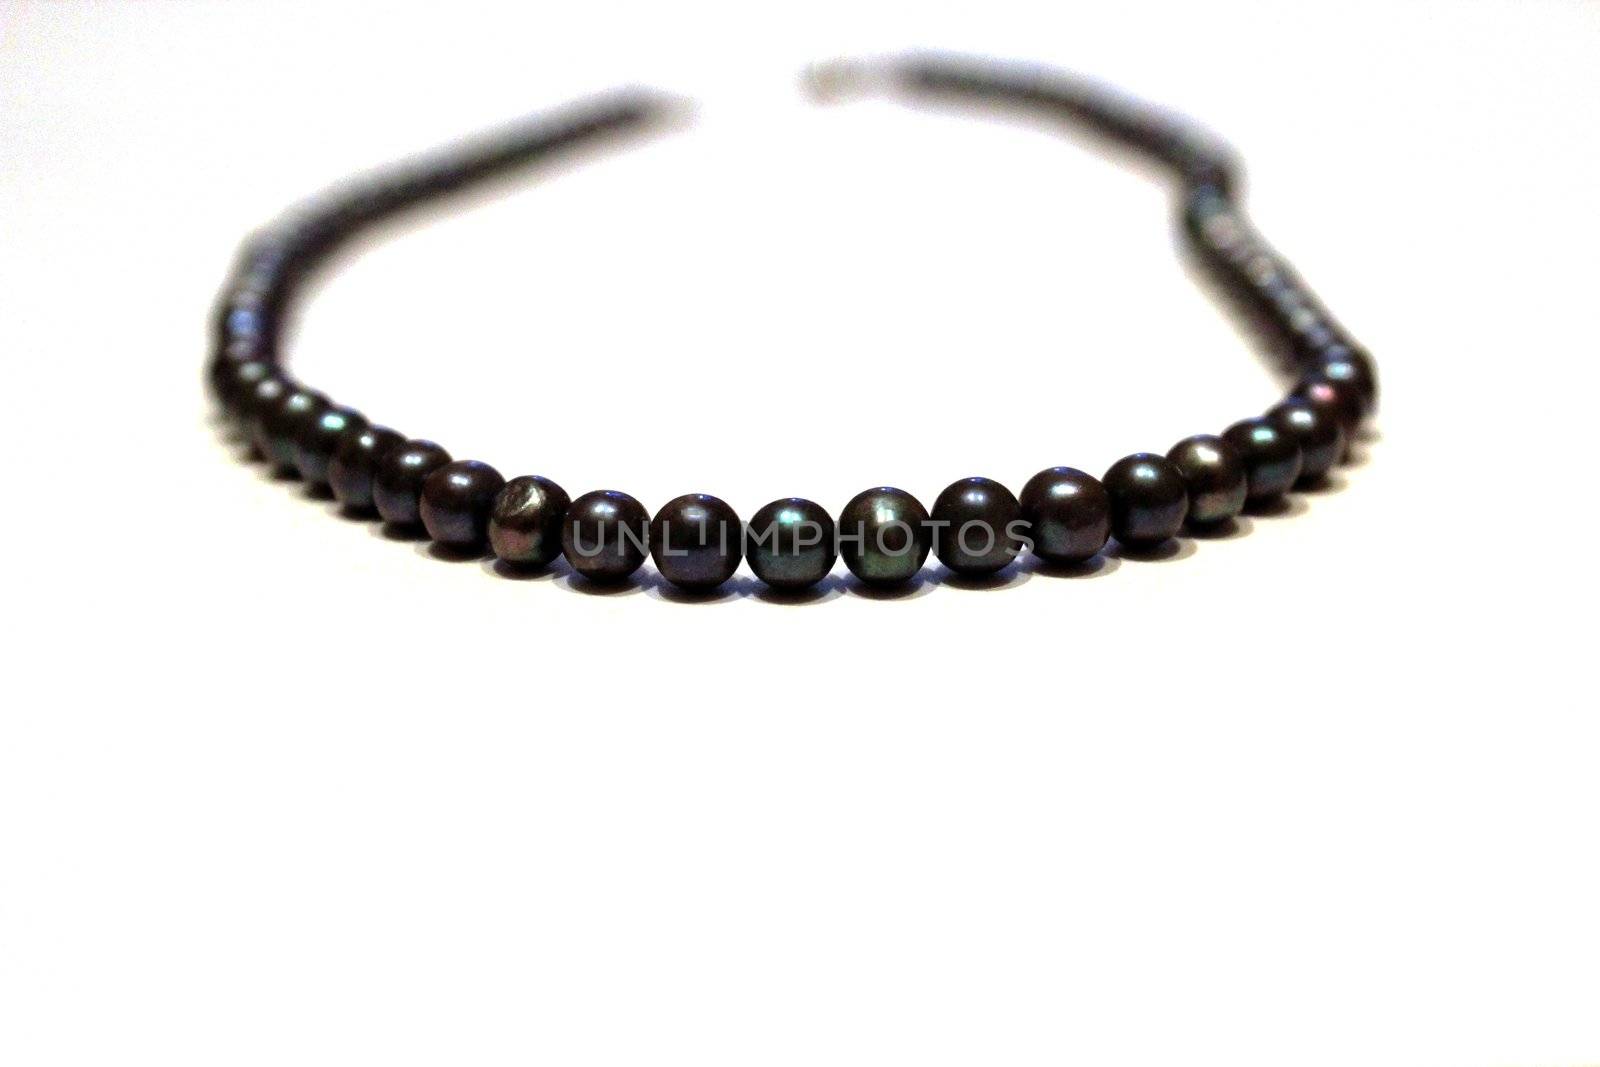 necklace of black pearls by Metanna